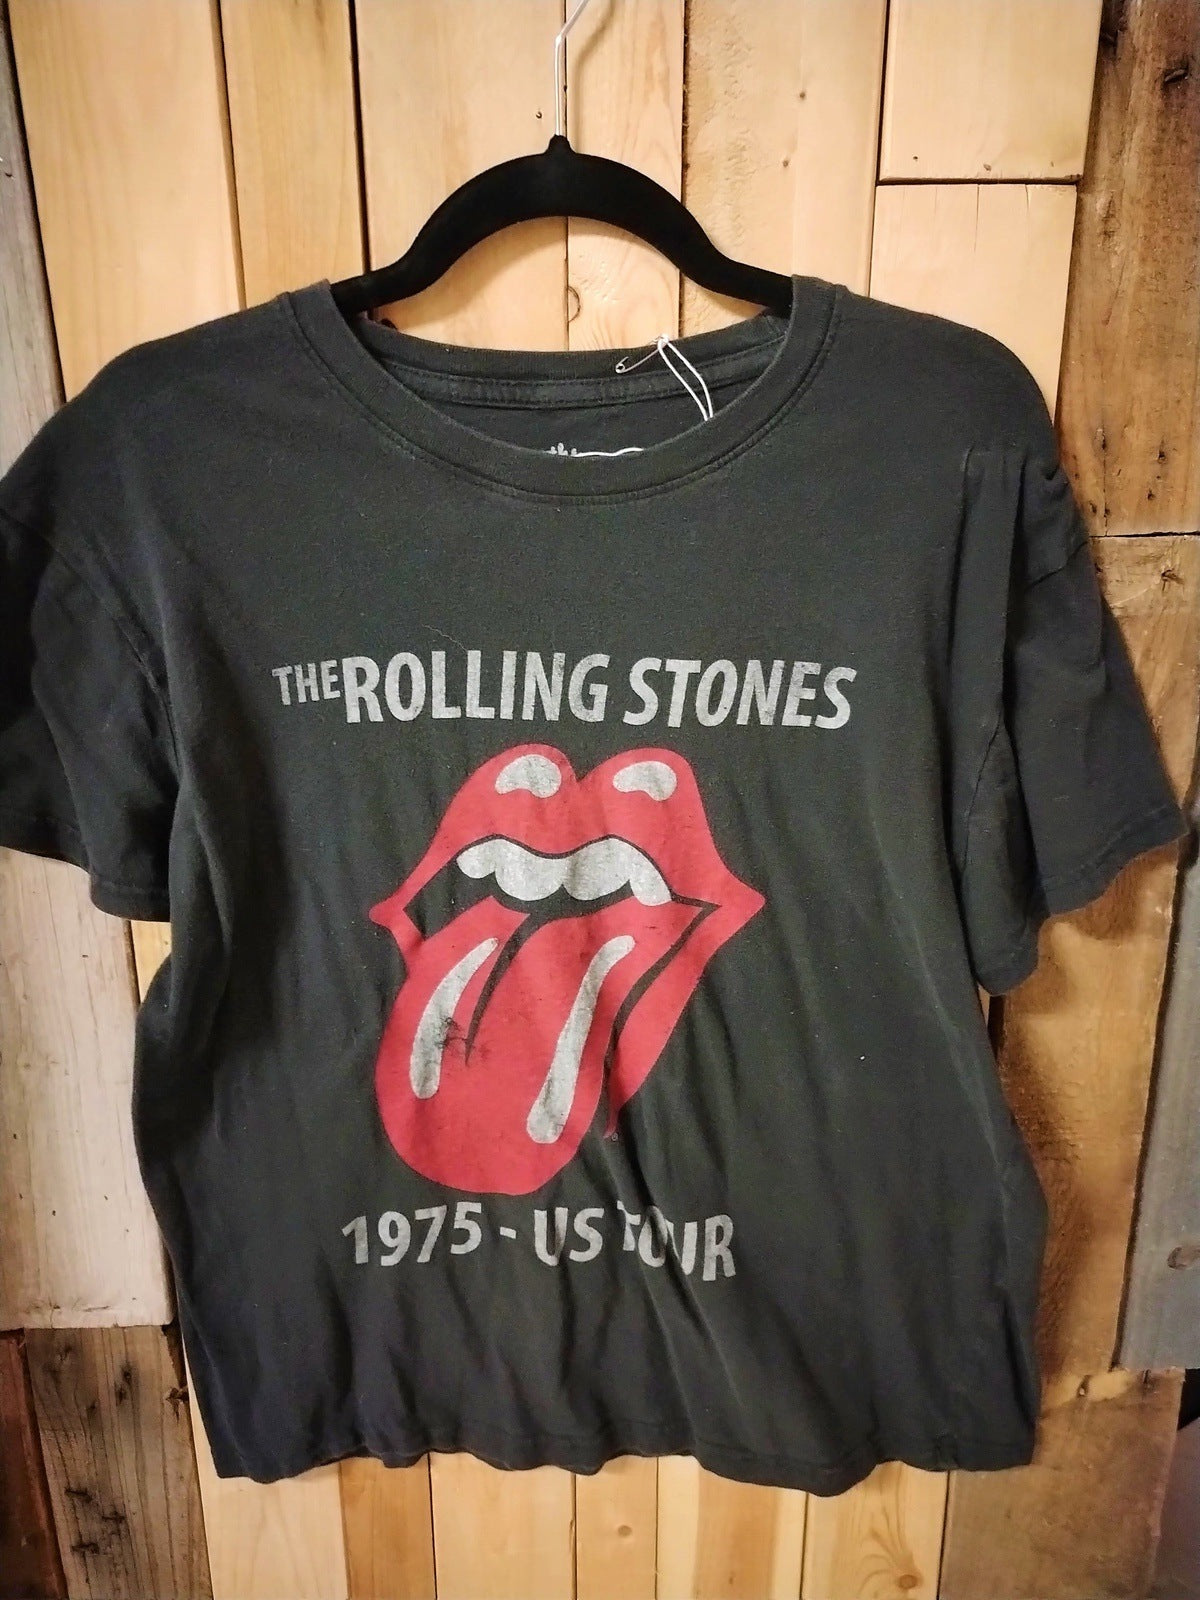 The Rolling Stones Official Merchandise 